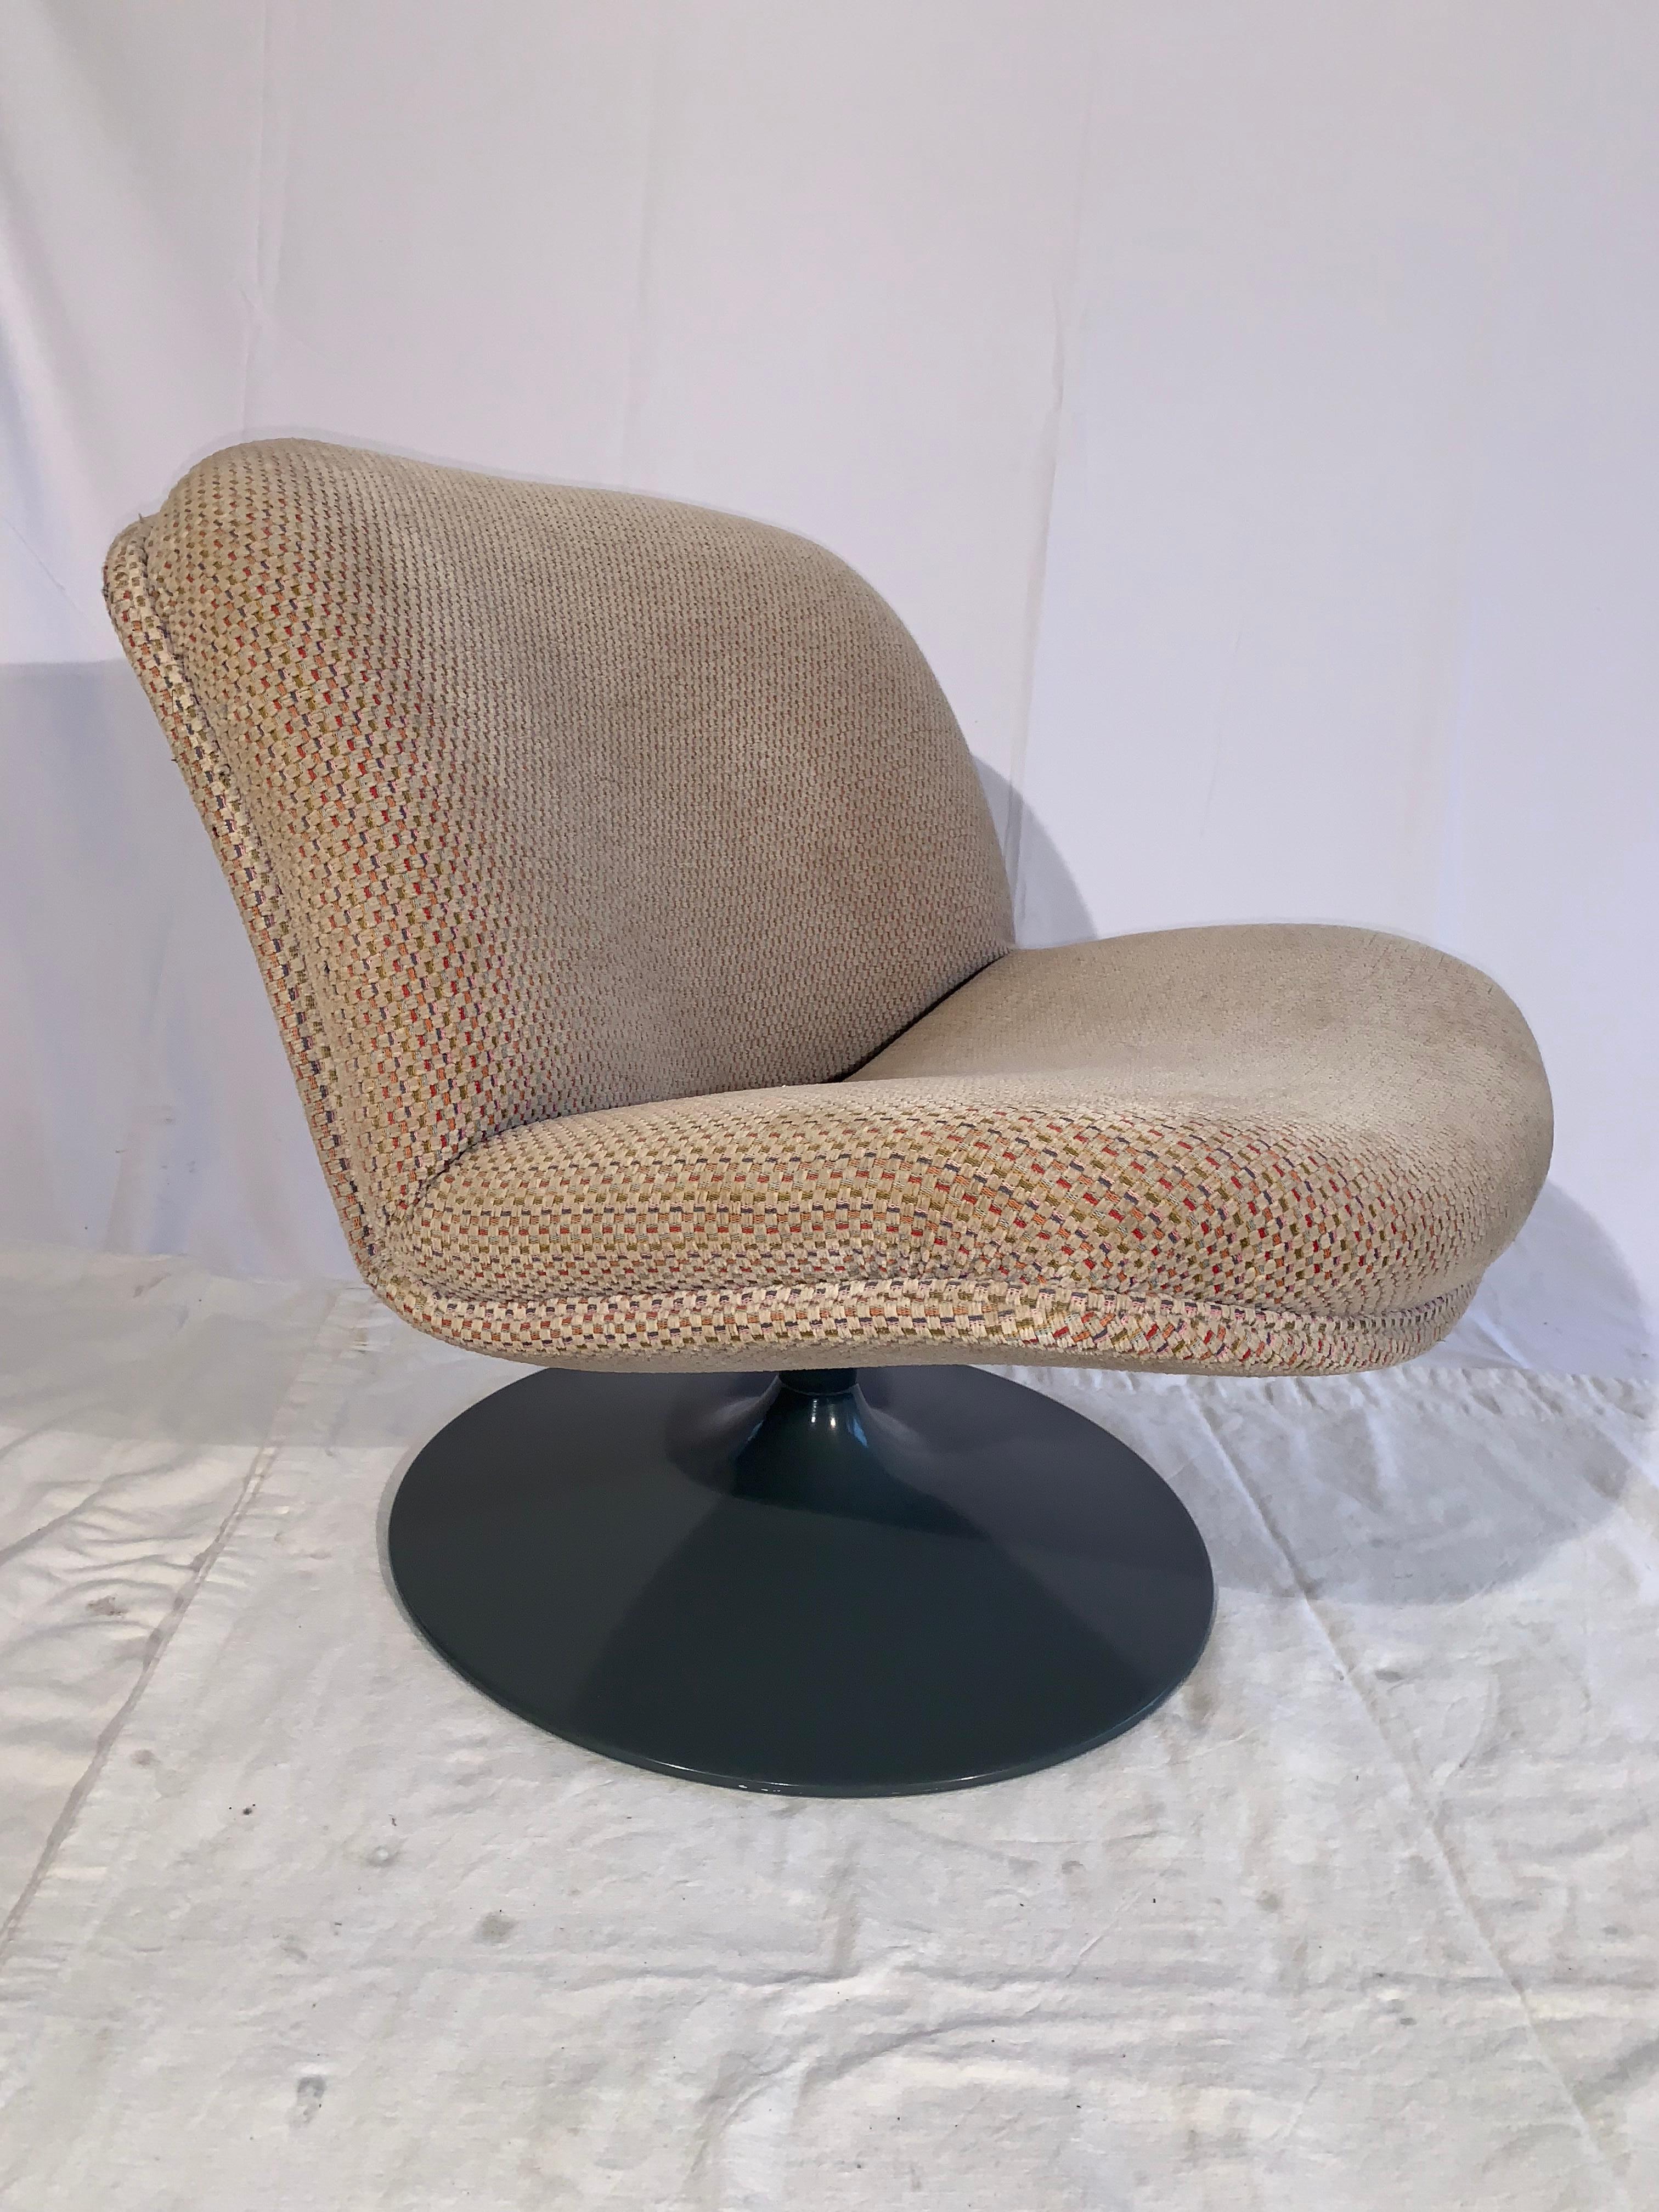 A wonderful pair of vintage swivel chairs in very good condition.
Fabric shows light wear, definitely usable. Bases are clean and free of any wear.
They are comfy and swivel and are great for smaller spaces.